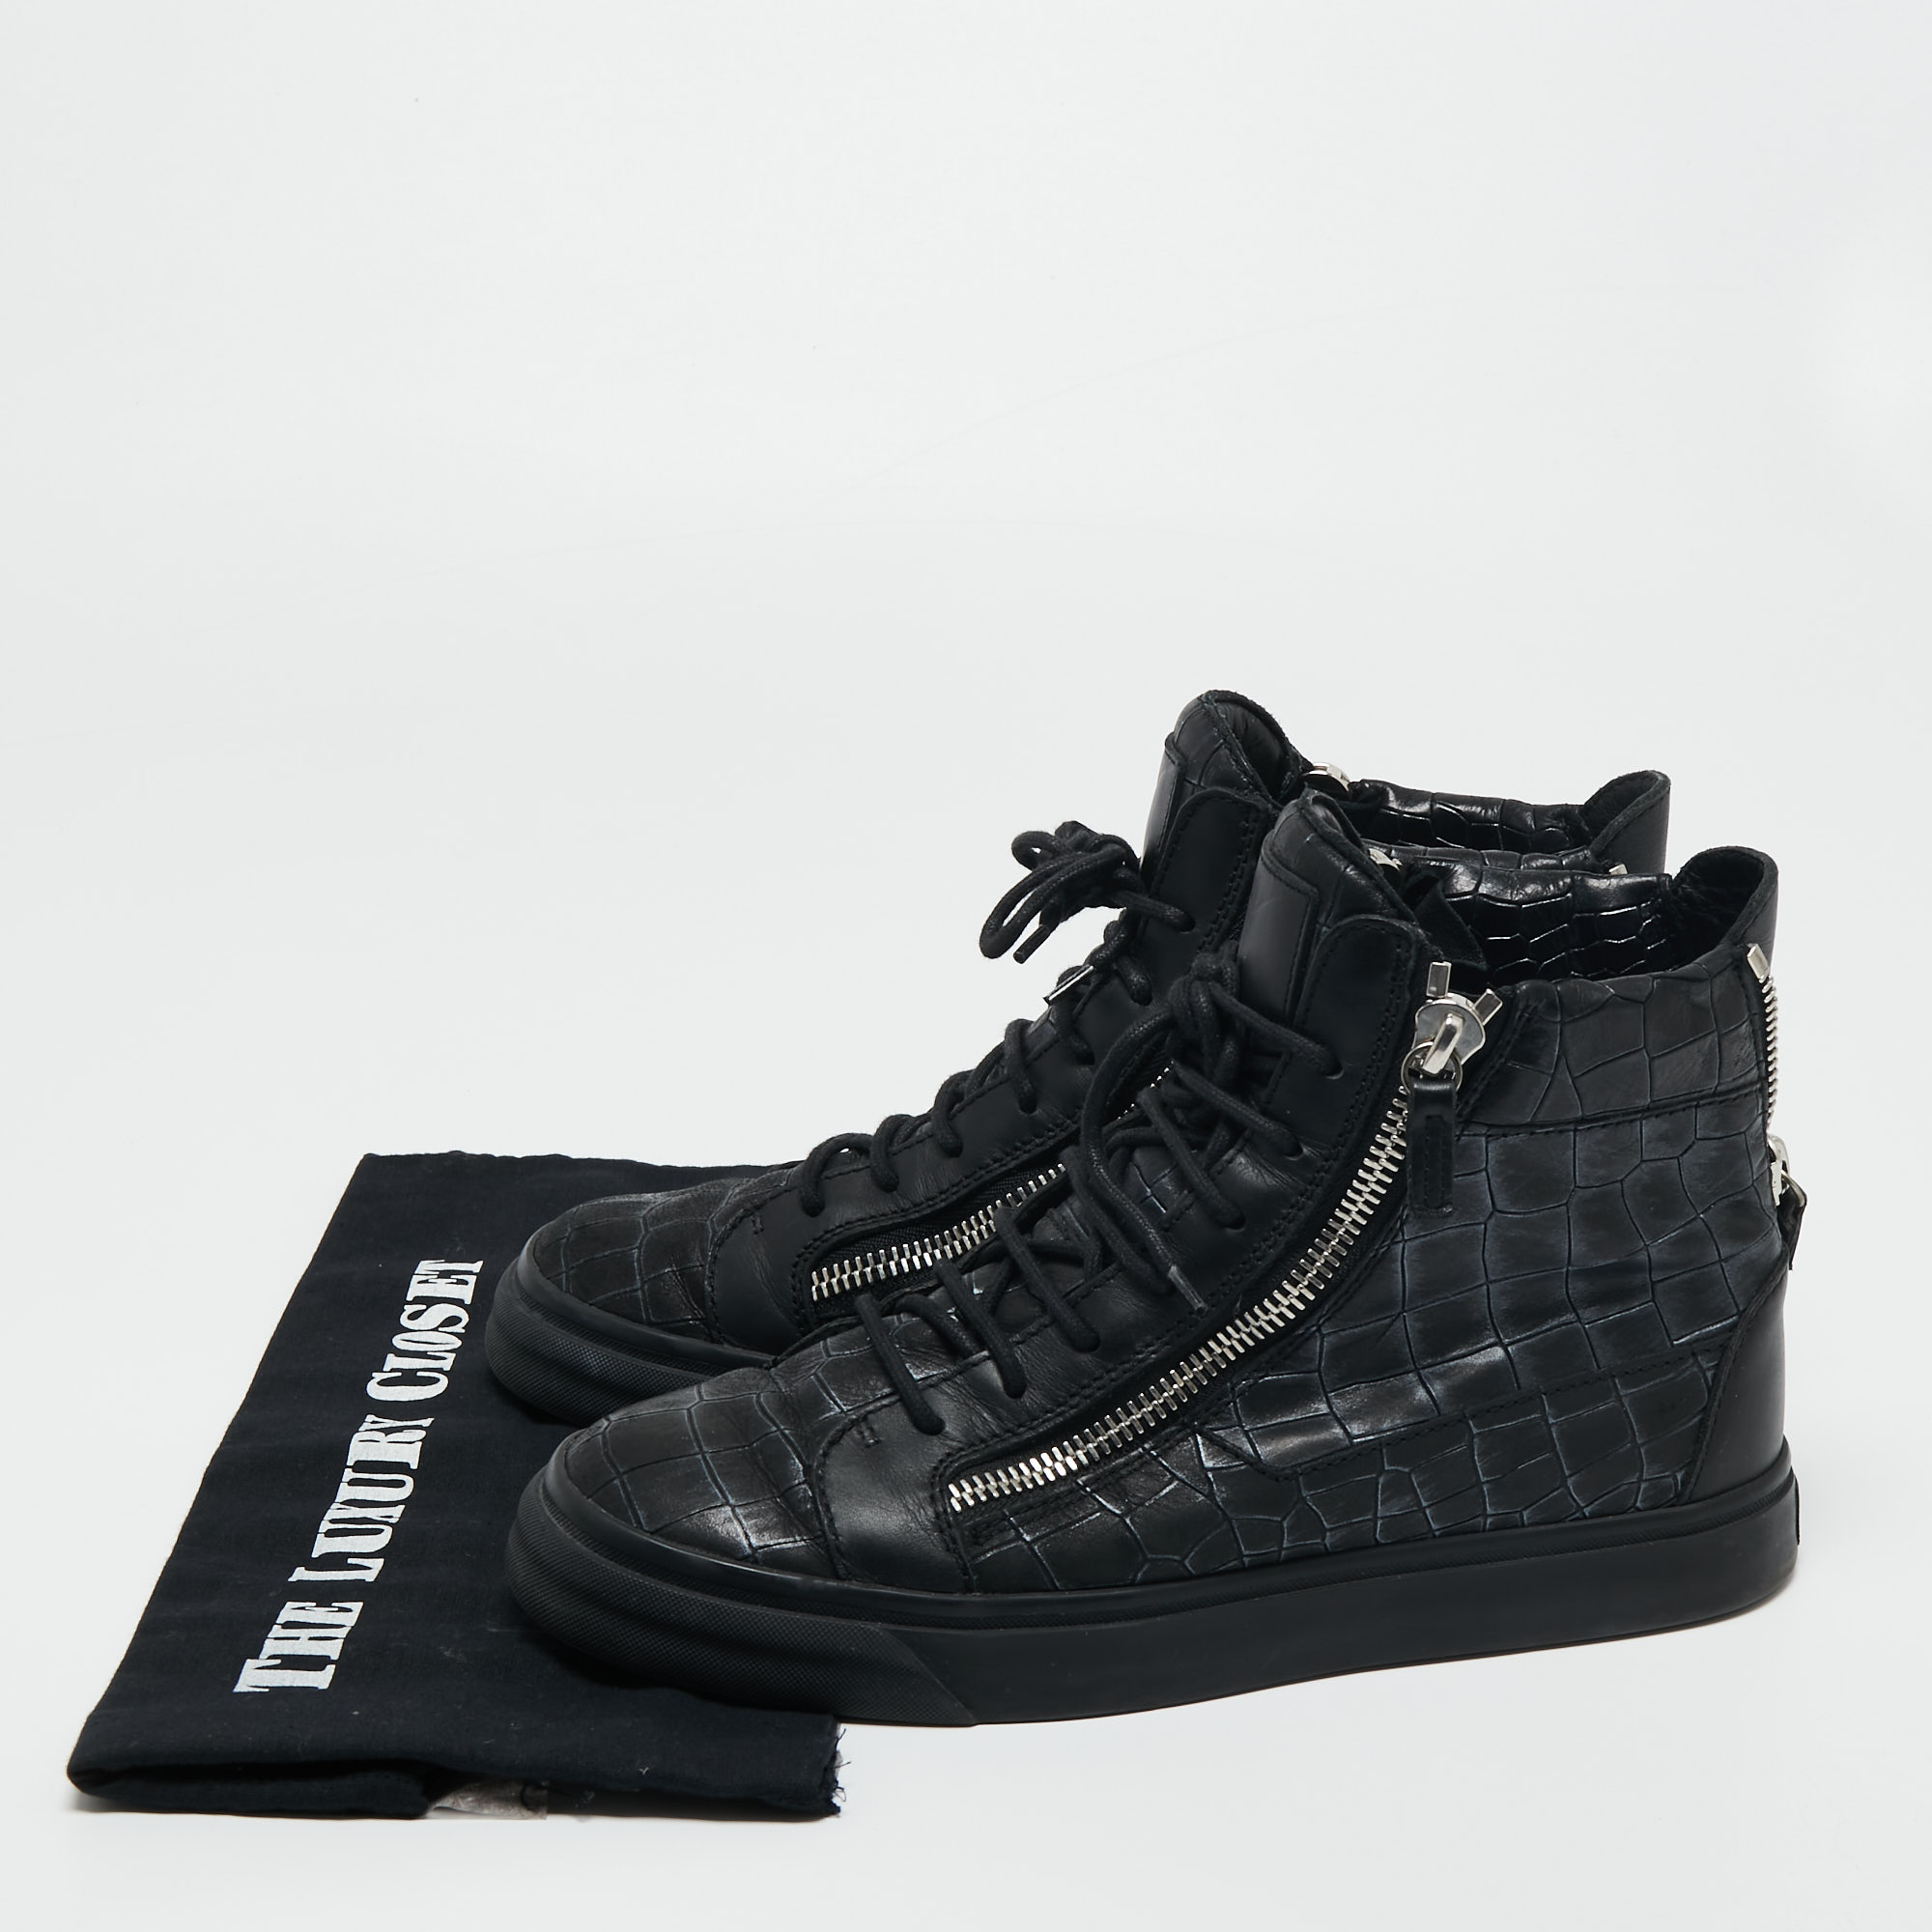 Giuseppe Zanotti Black Croc Embossed Leather London High Top Sneakers Size 41